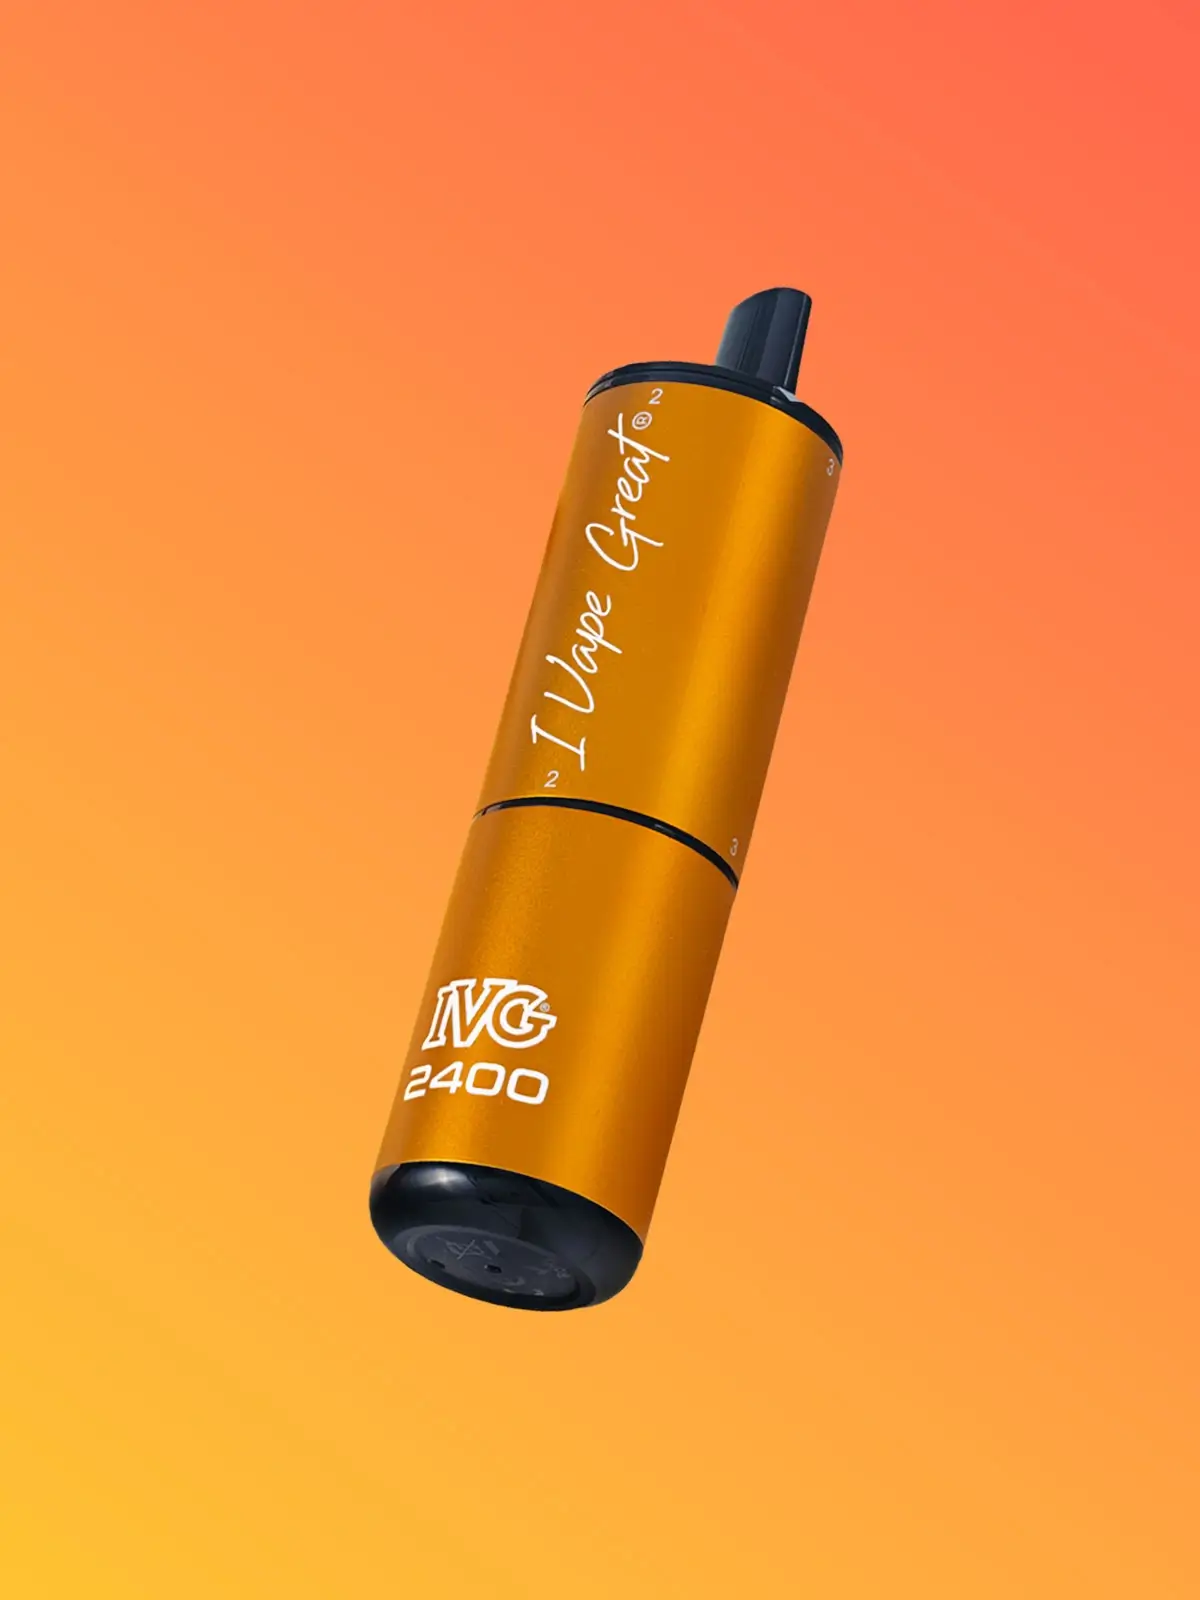 An IVG 2400 disposable in Exotic Edition in front of an orange background